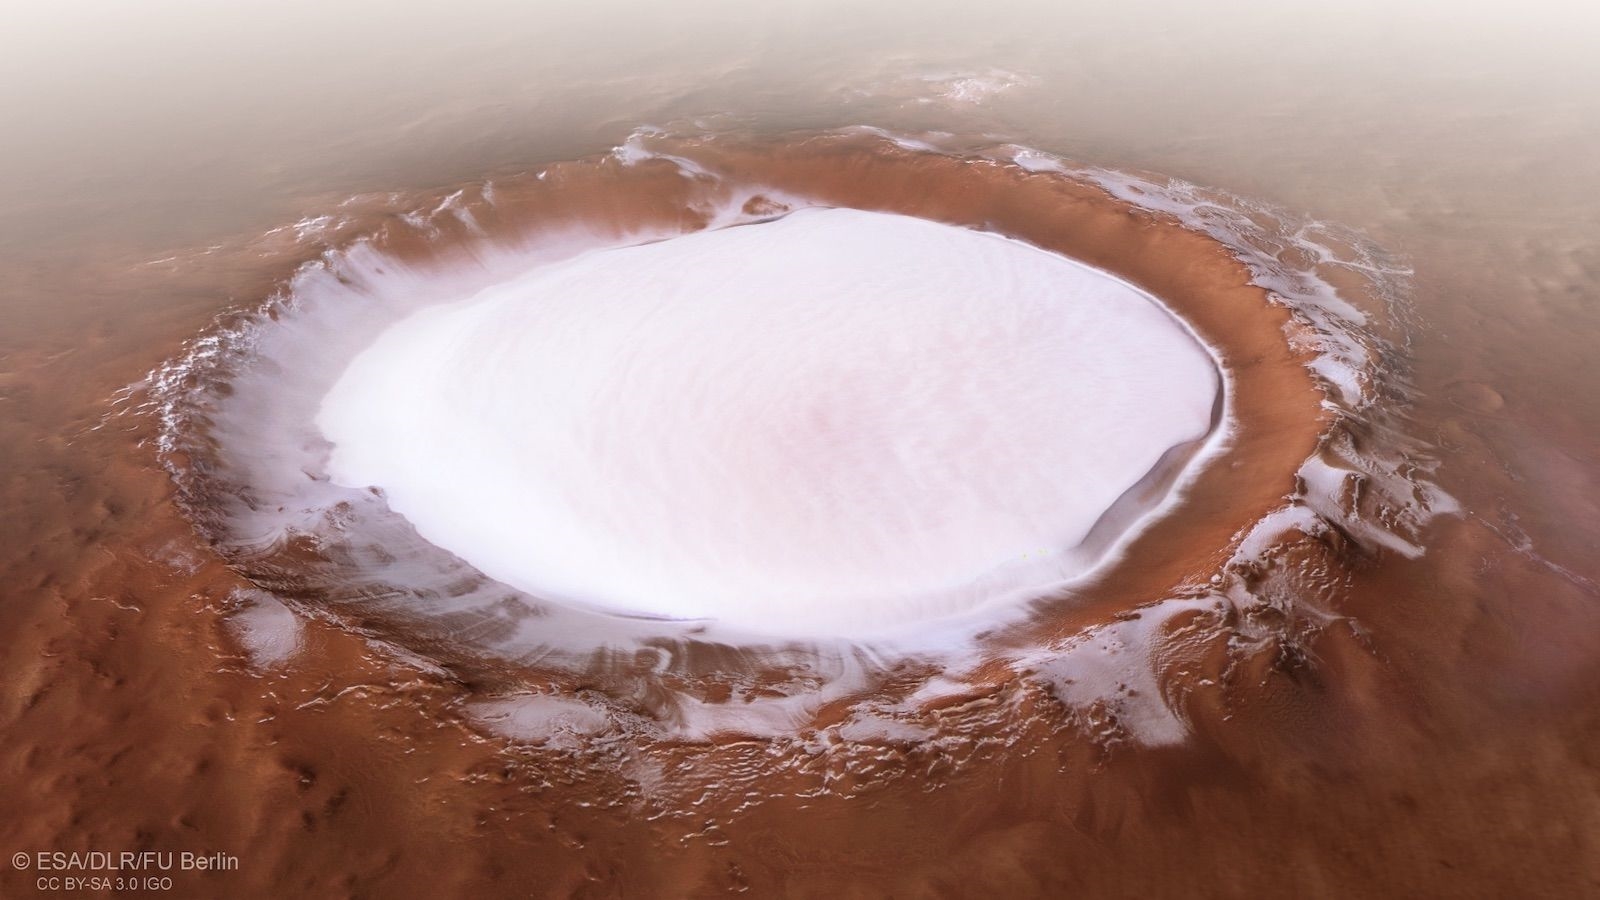 Mars Express orbiter snaps stunning image of Korolev crater | DeviceDaily.com